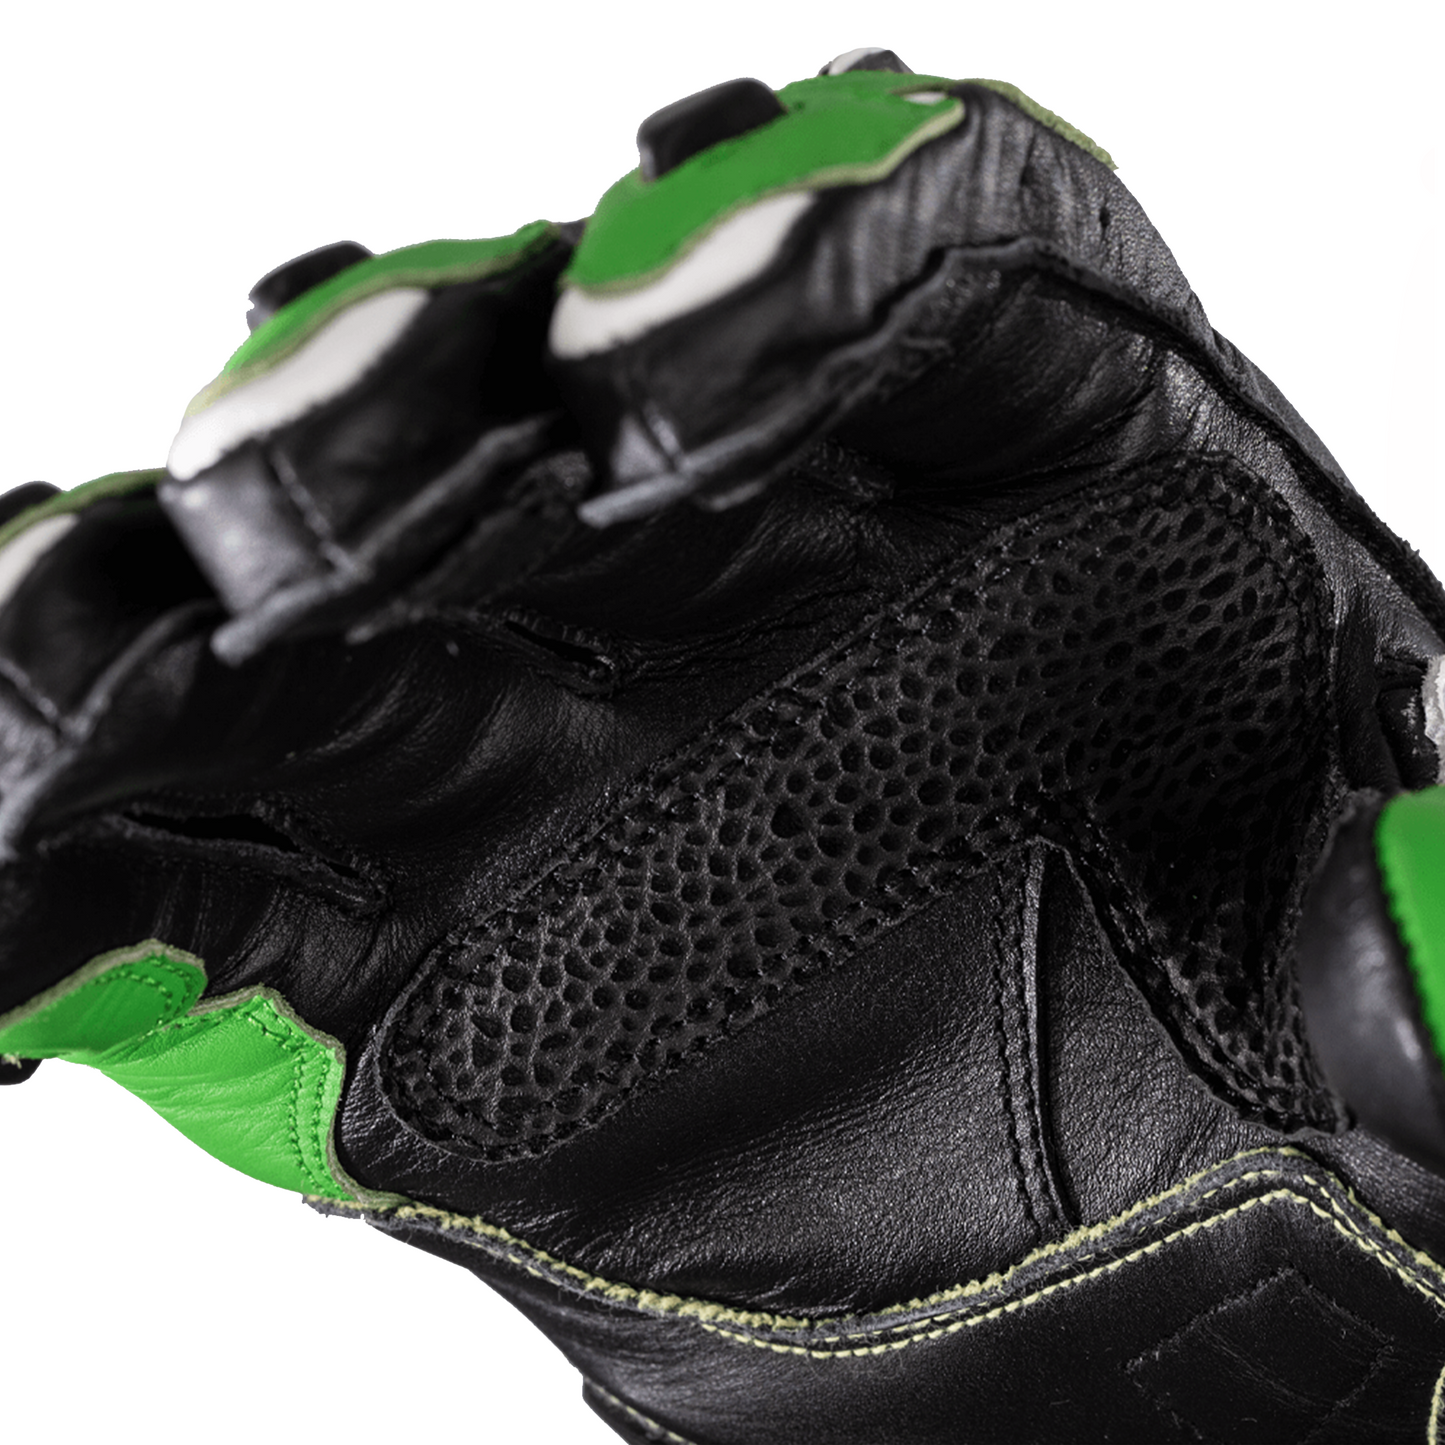 RST Tractech Evo 4 (CE) Gloves - Green